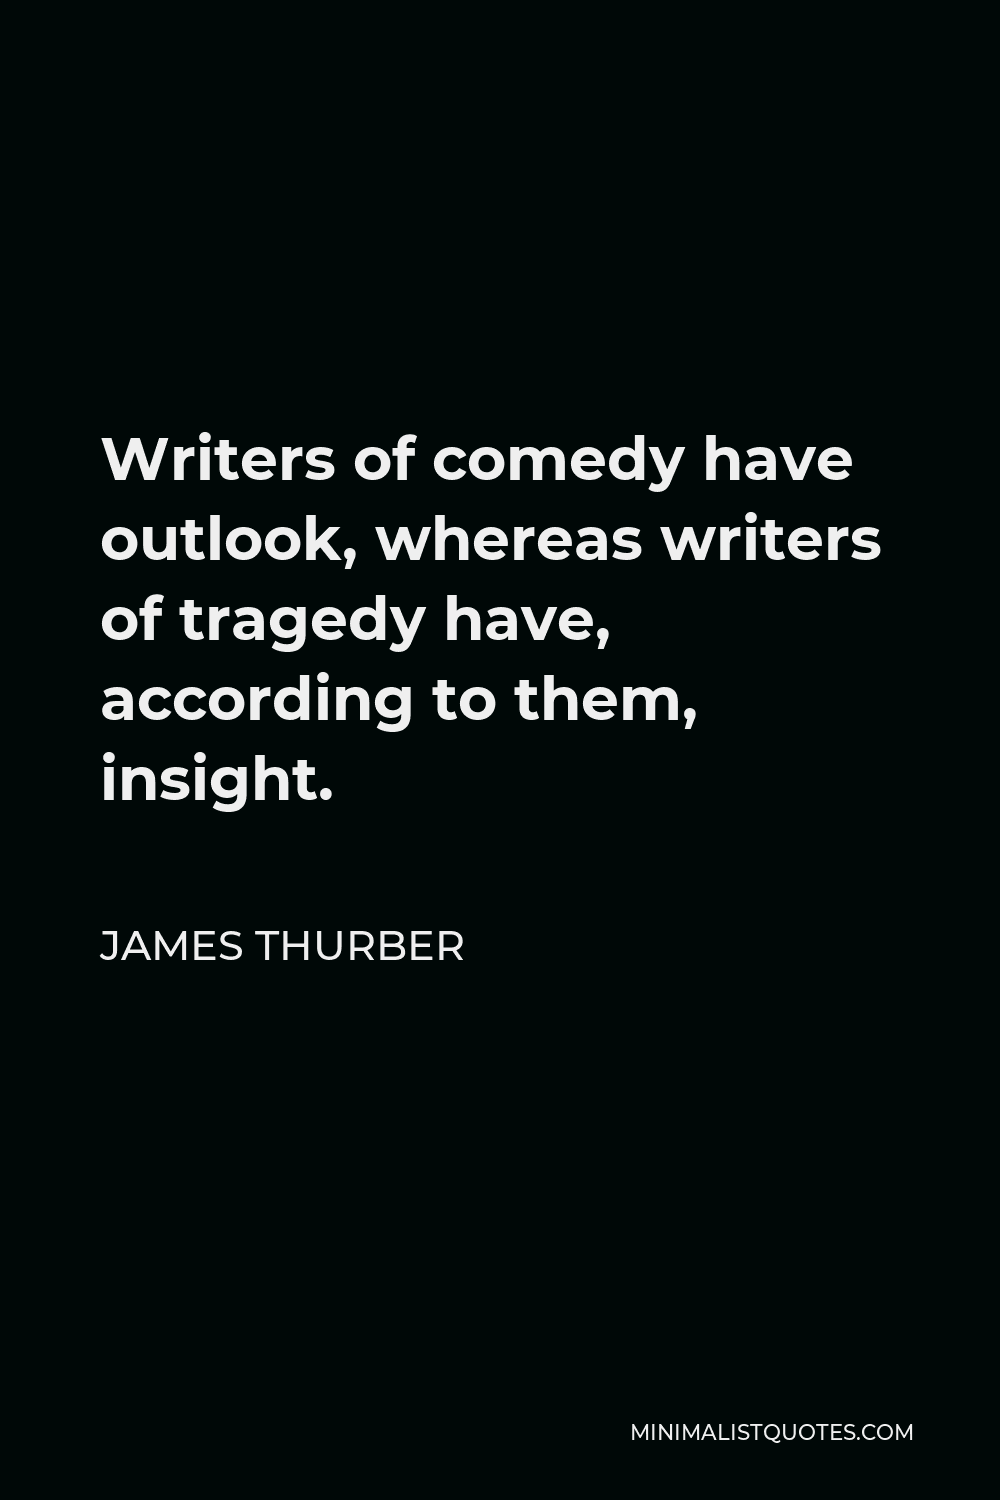 James Thurber Quote - Writers of comedy have outlook, whereas writers of tragedy have, according to them, insight.